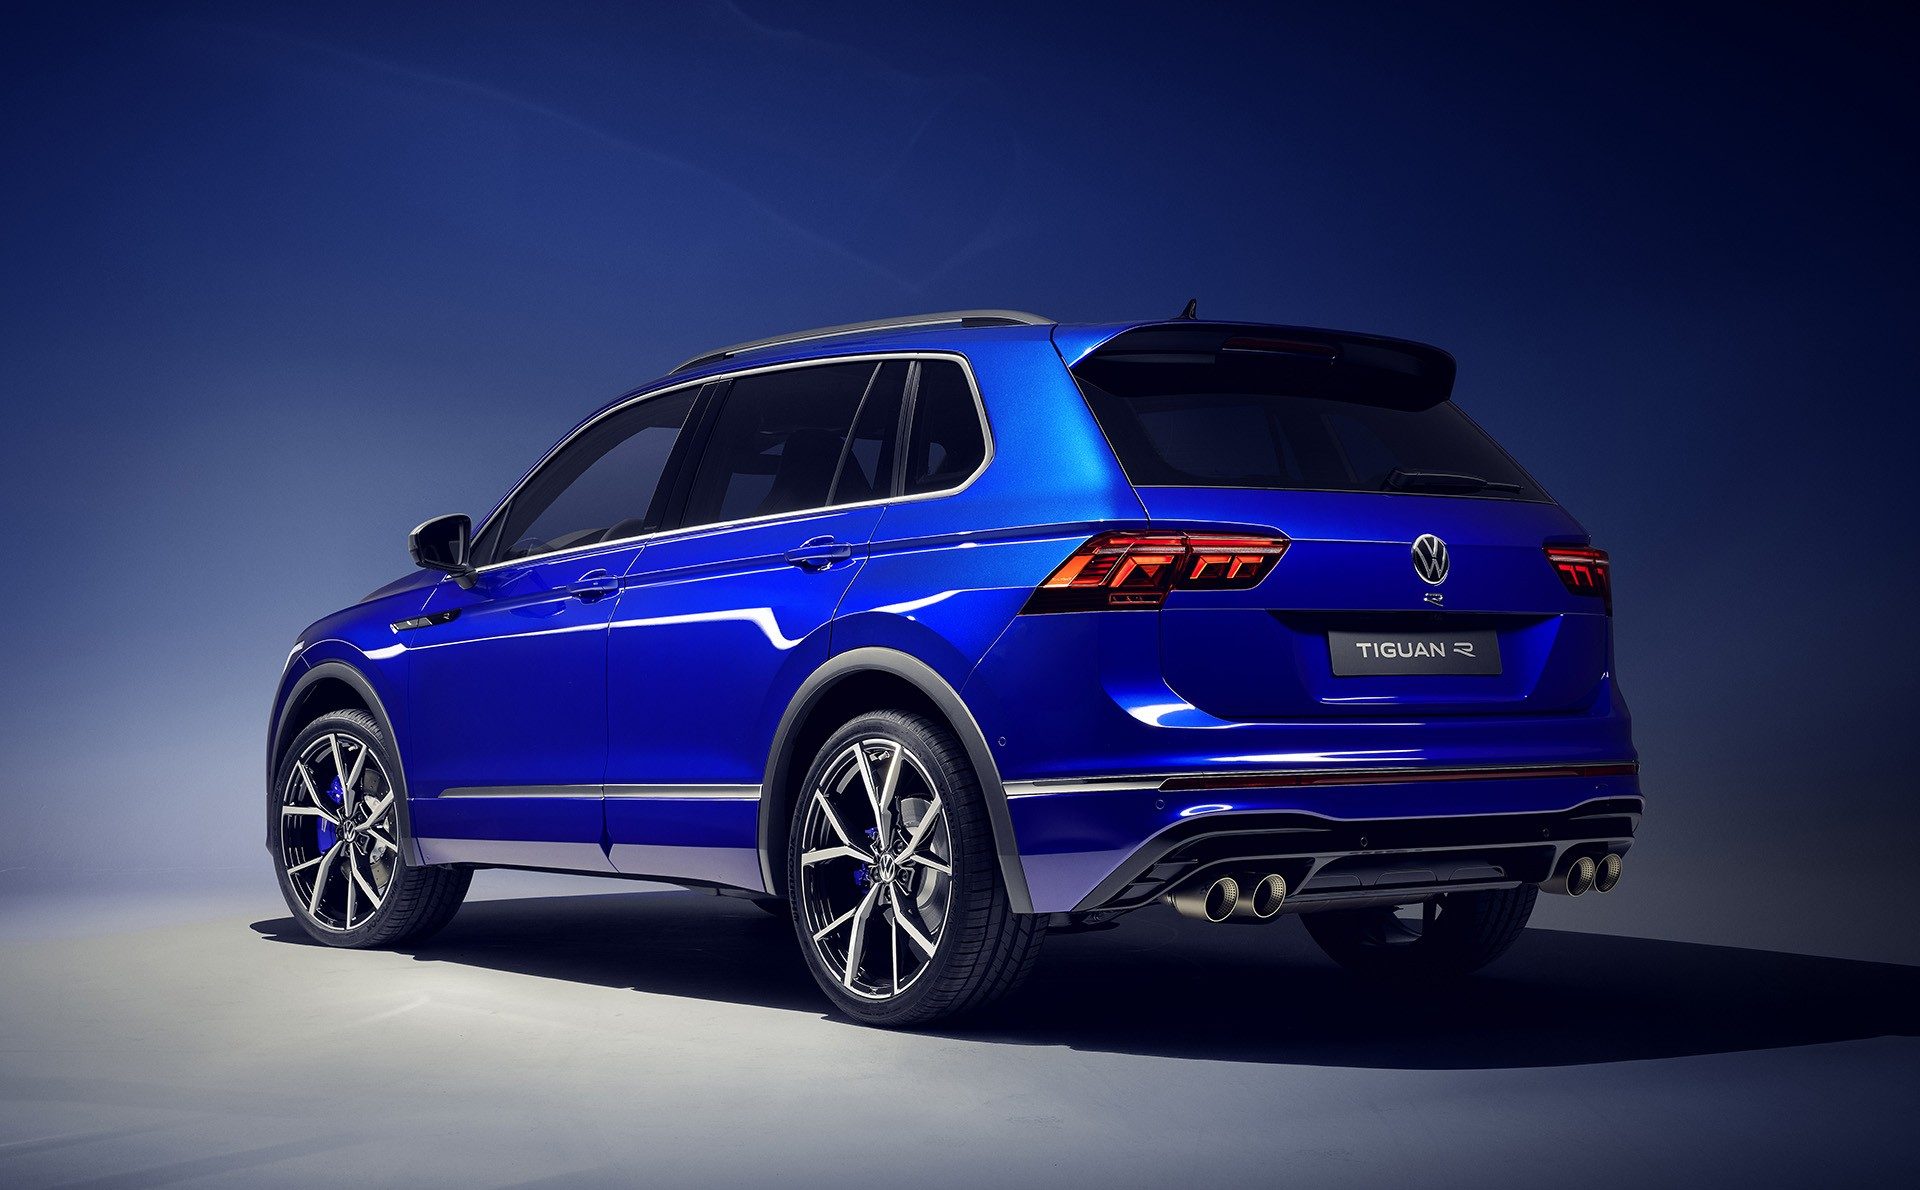 2021 VW Tiguan Facelift Debuts With New R Variant Pumping Out 316 HP